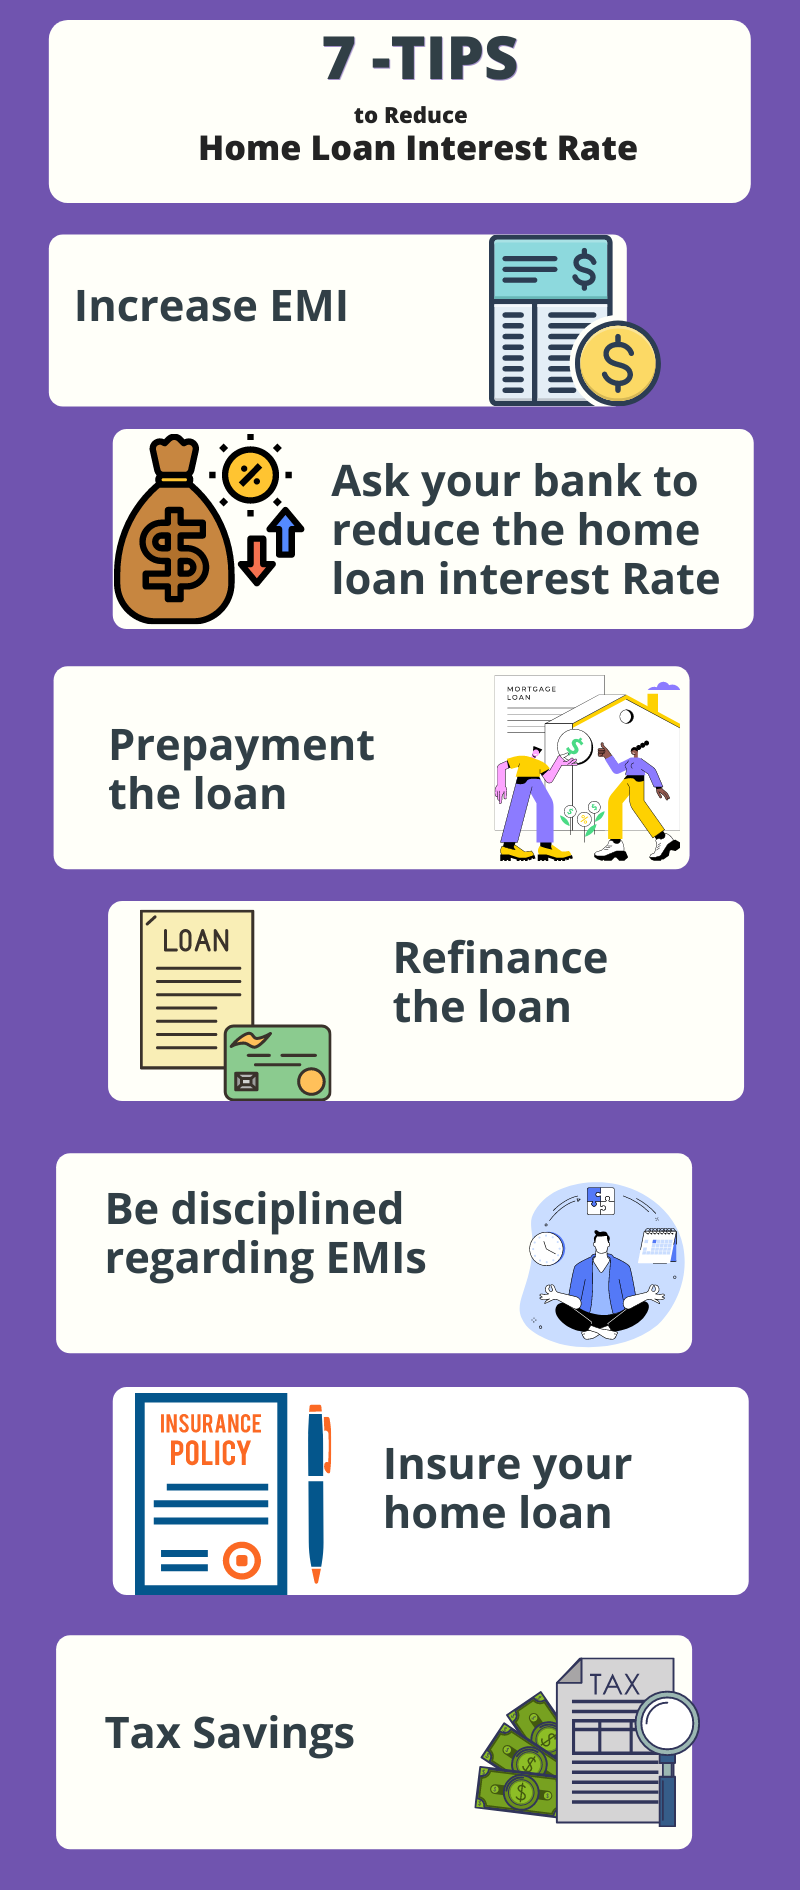 Tips to Reduce Home Loan Interest Rate